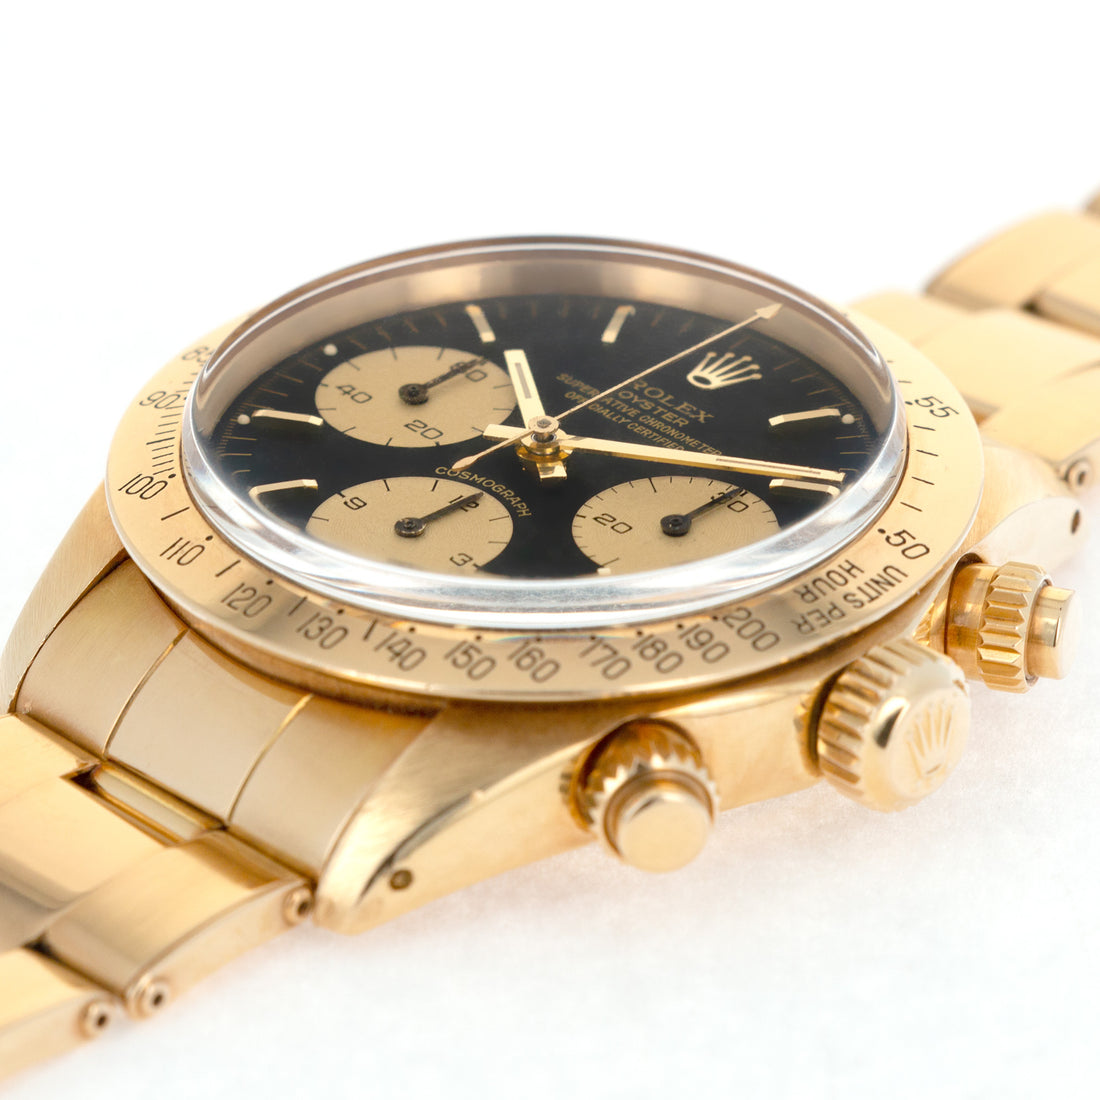 Rolex Yellow Gold Cosmograph Daytona Watch Ref. 6265, with Original Box and Papers